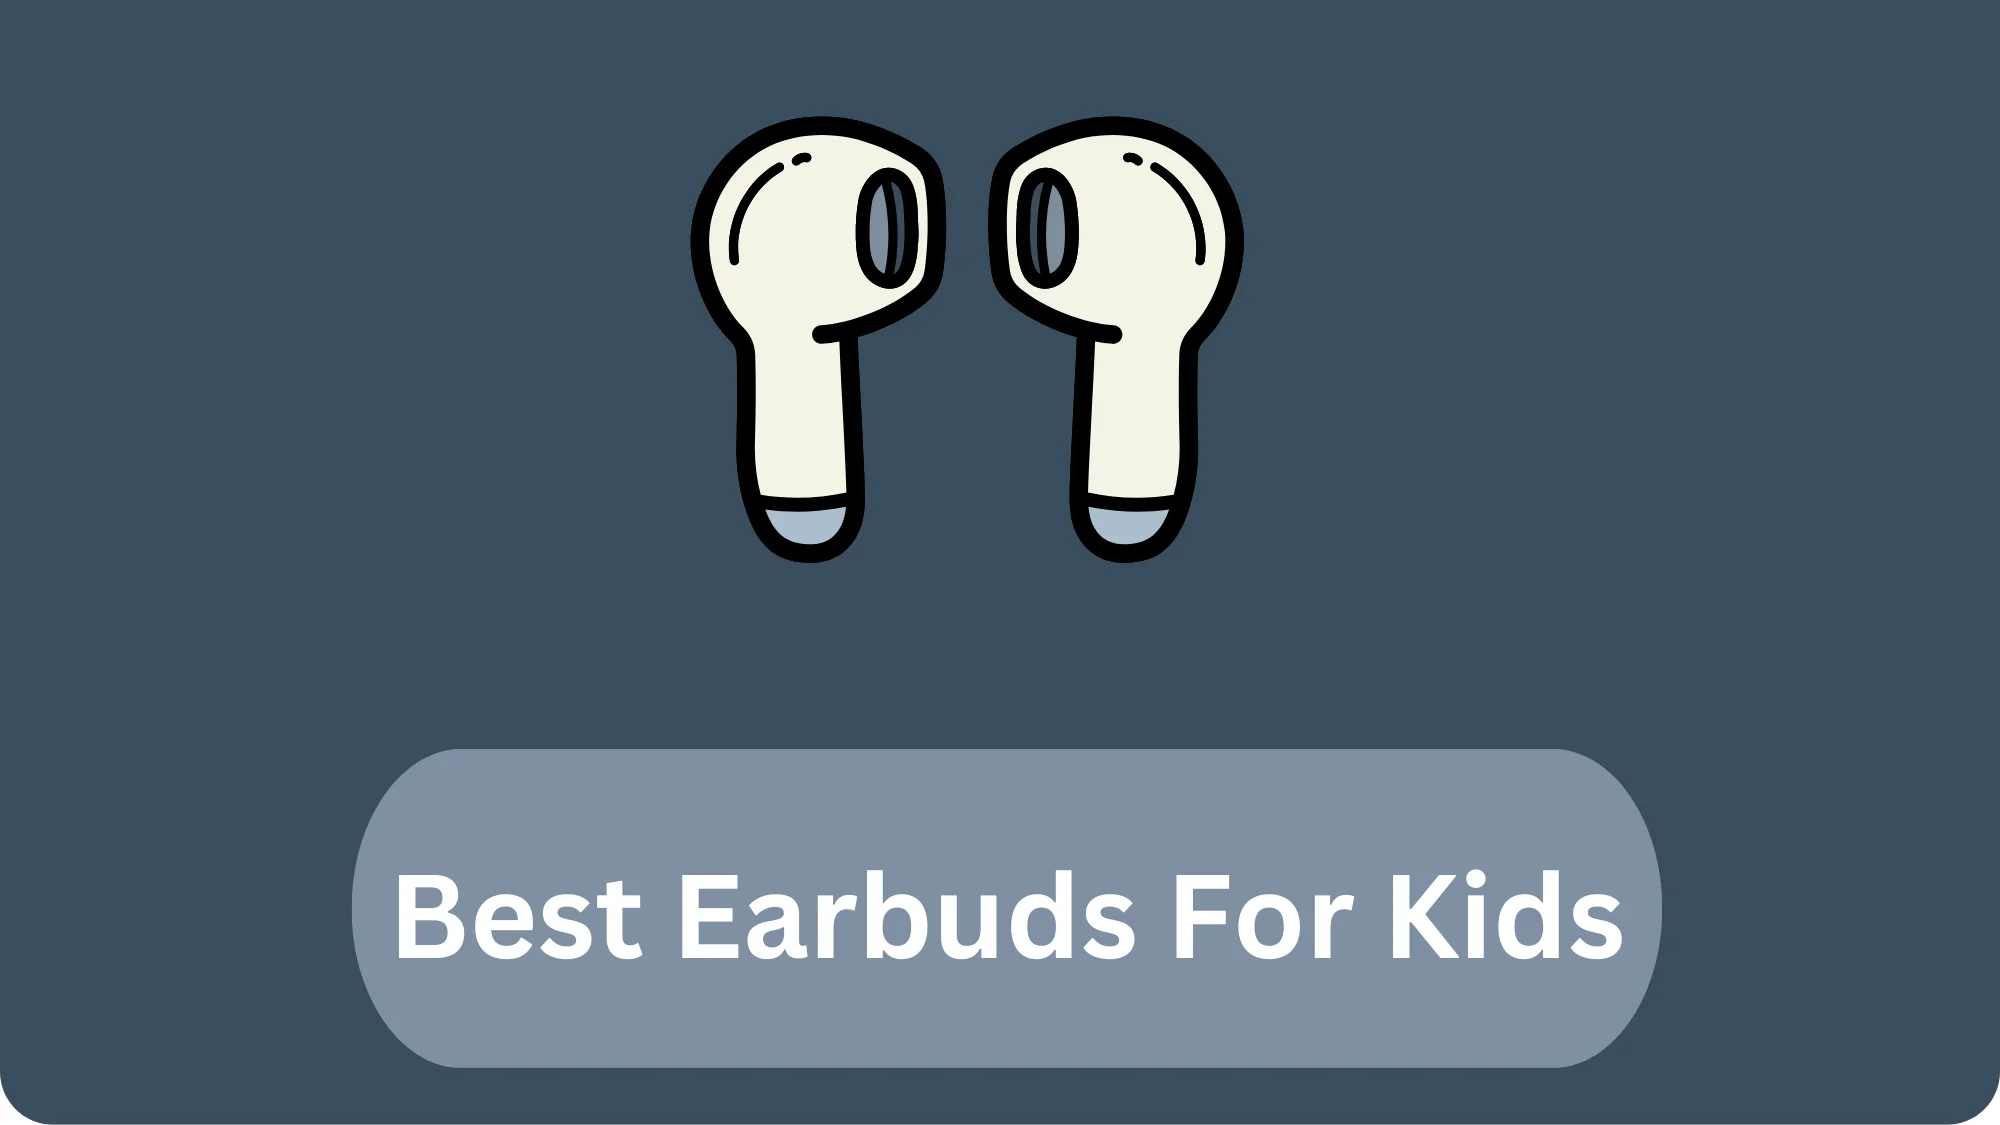 Best Earbuds For Kids